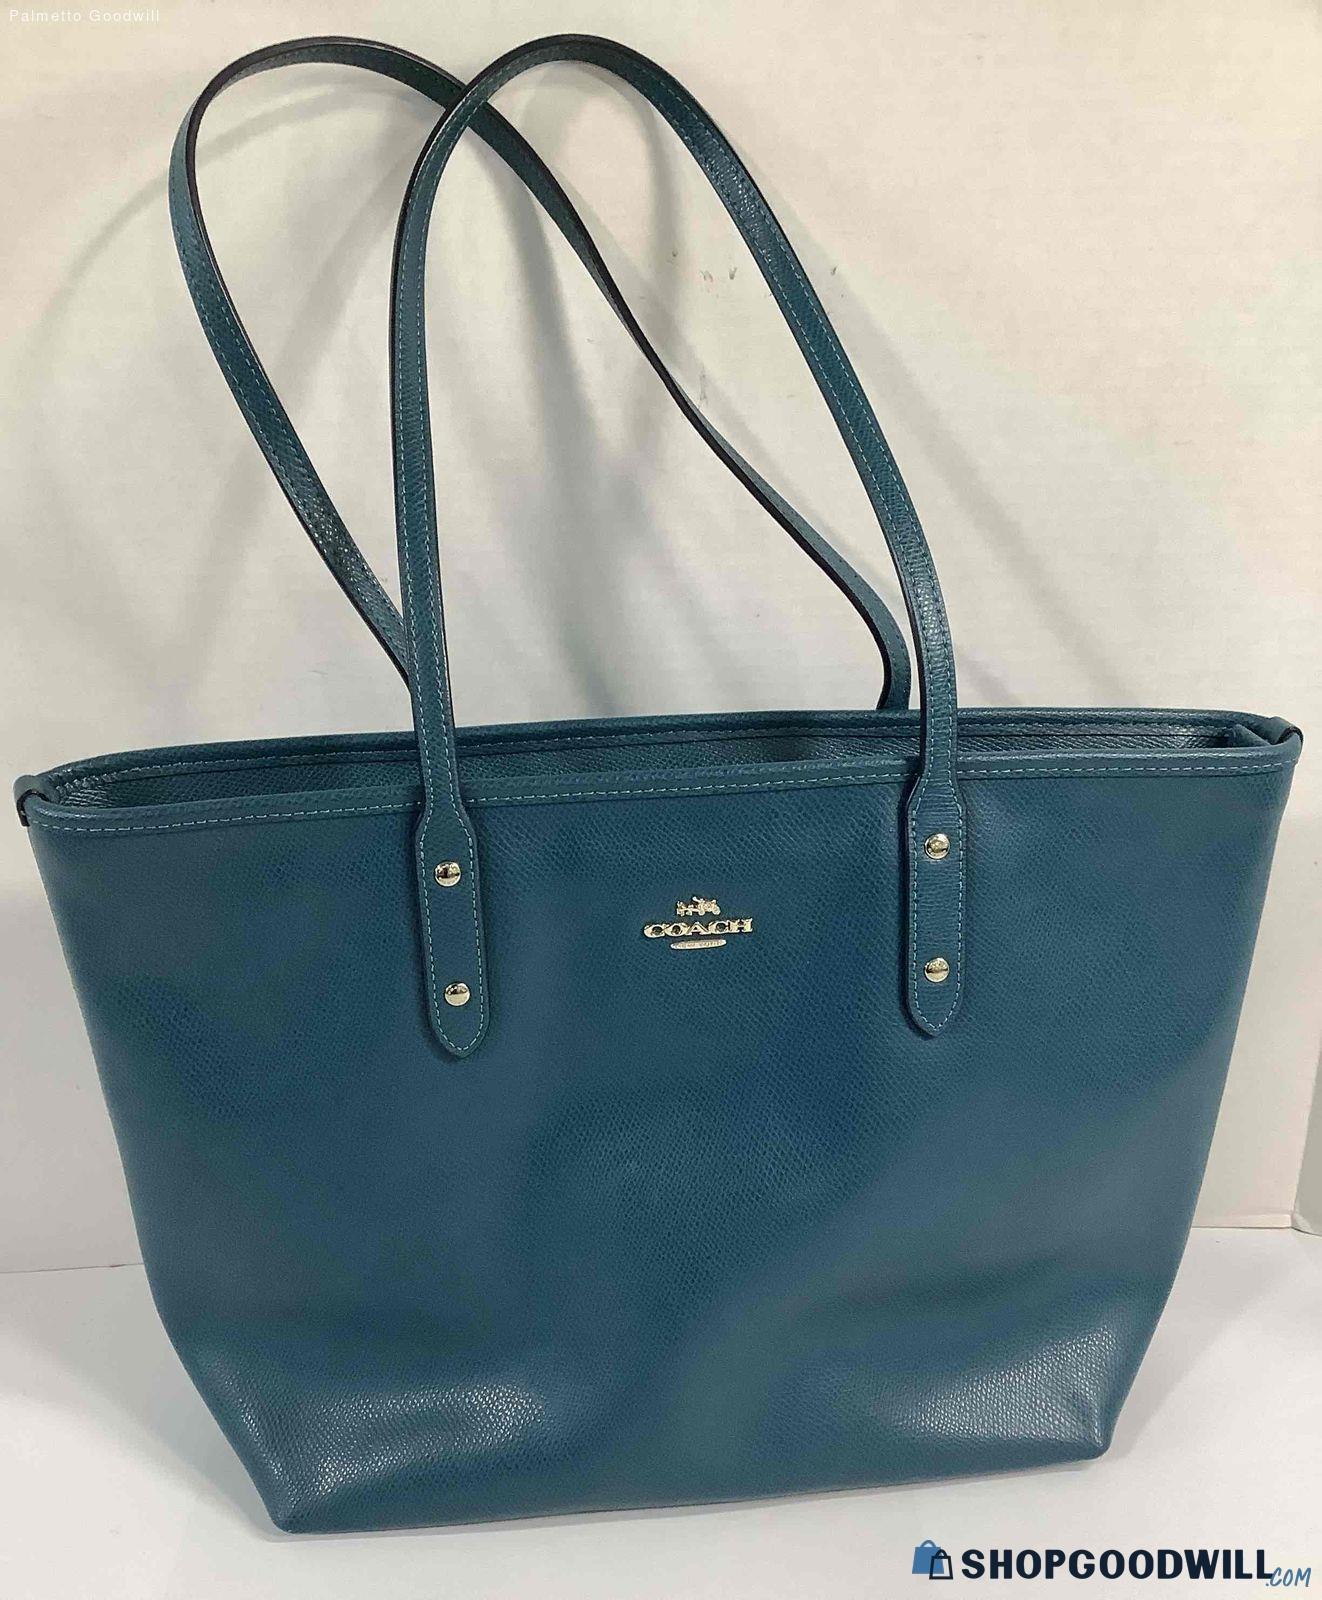 Coach Teal/Gold Shoulder Bag Authenticated - shopgoodwill.com